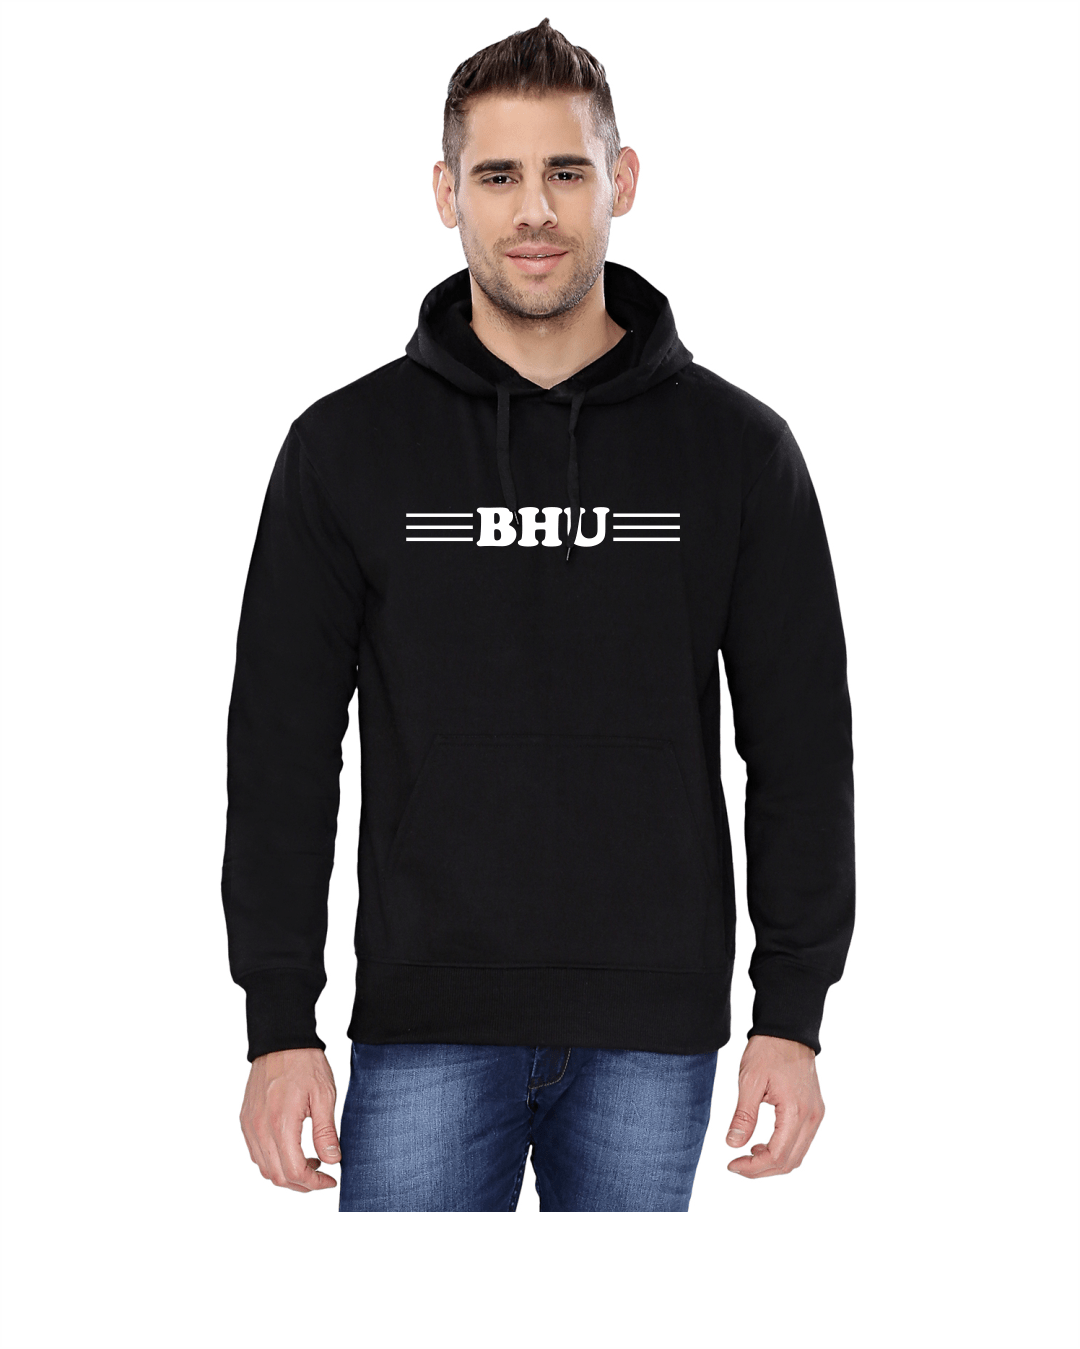 BHU Hoodies for Men with print – My Campus Store